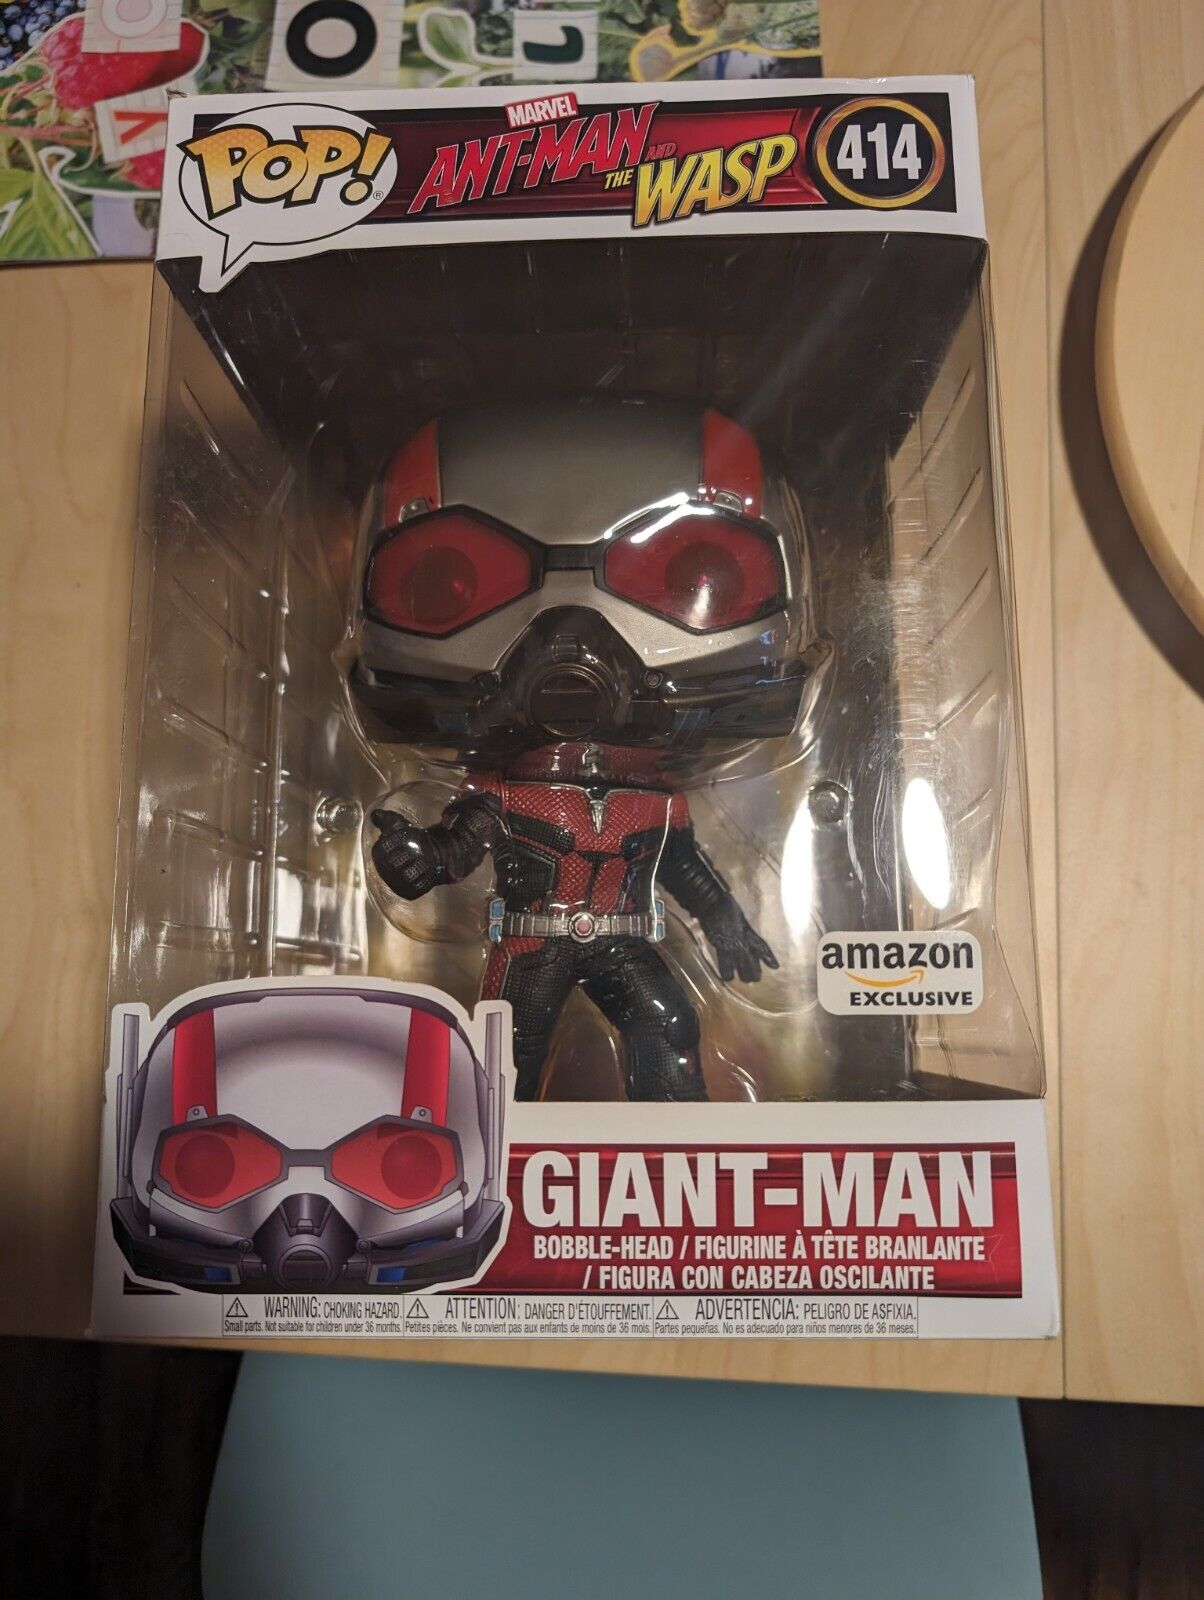 Giant-Man 414 Amazon Exclusive Ant-Man and The Wasp Funko POP